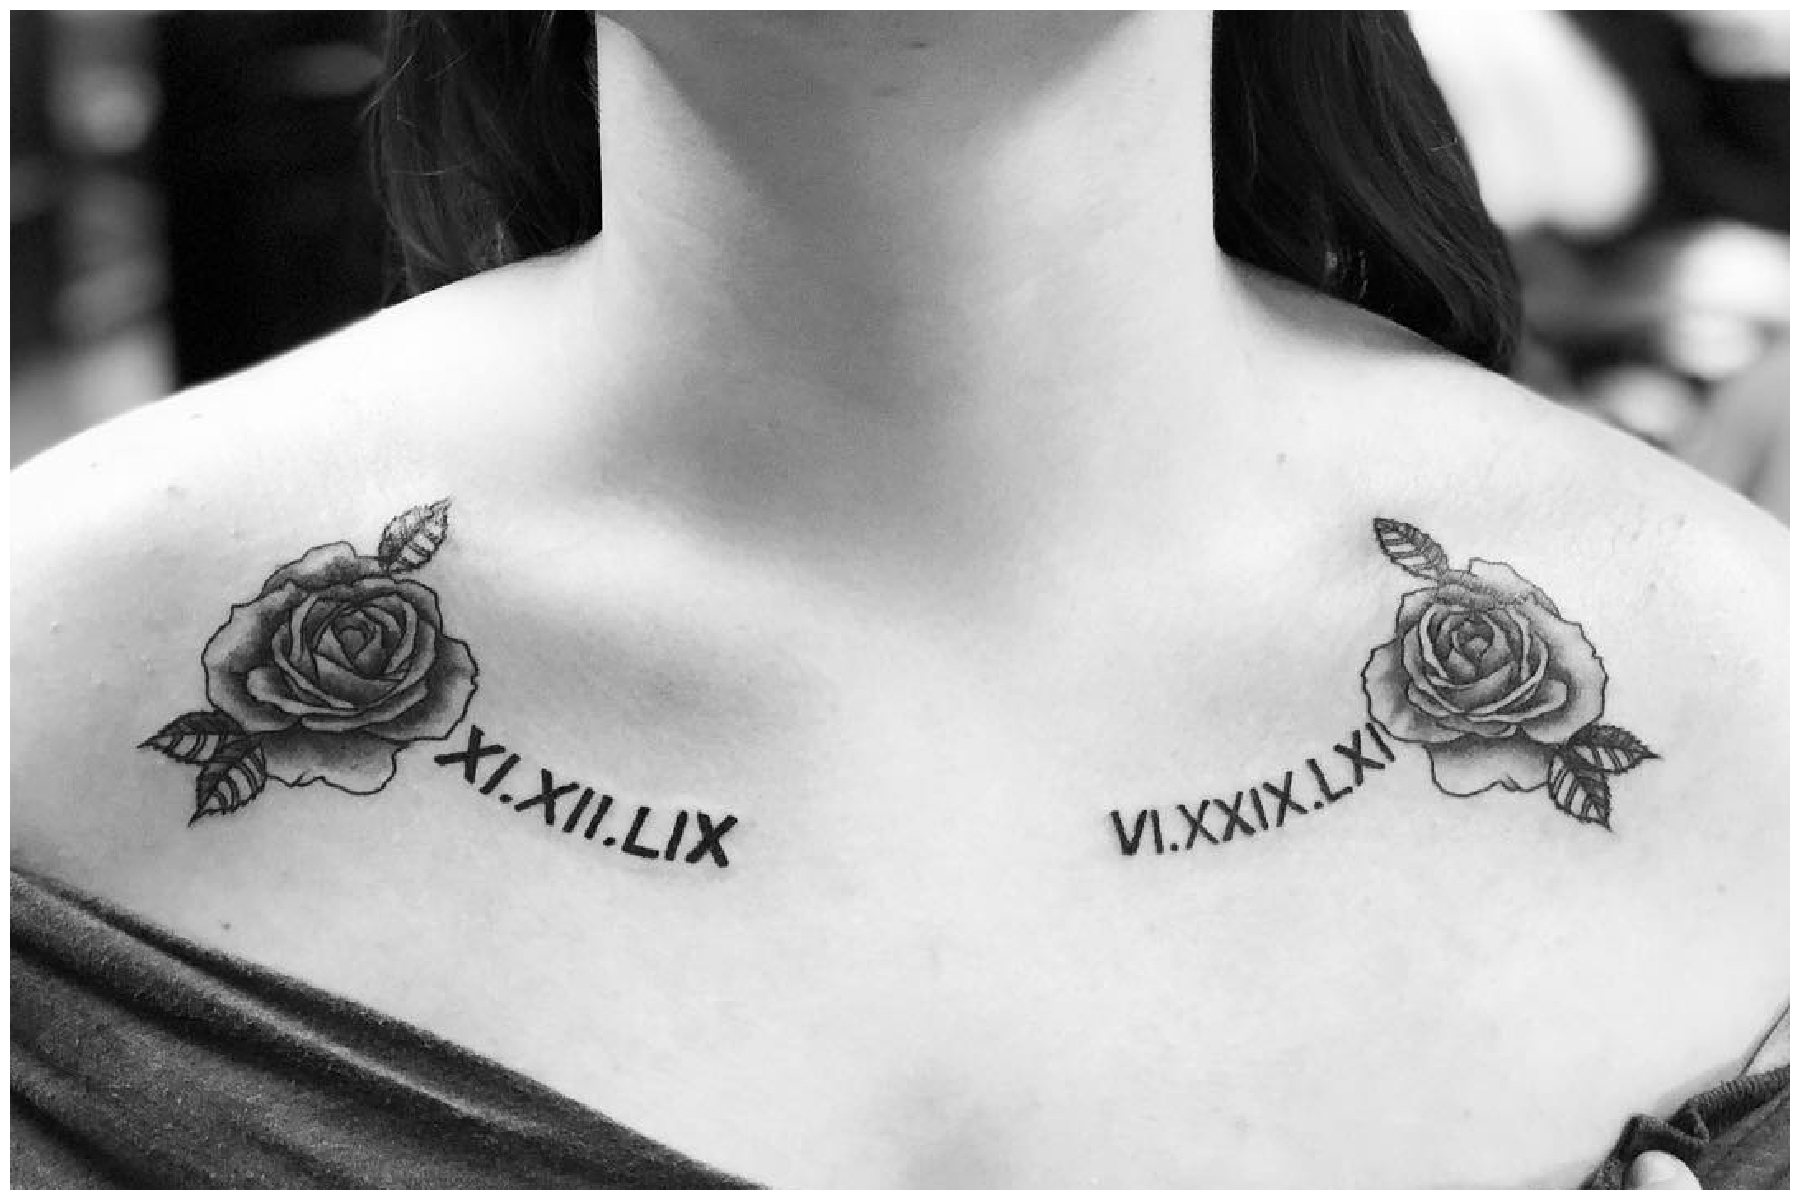 Tattoo uploaded by James Lightyear  Neo traditional roses added as a  border around existing roman numerals  Tattoodo